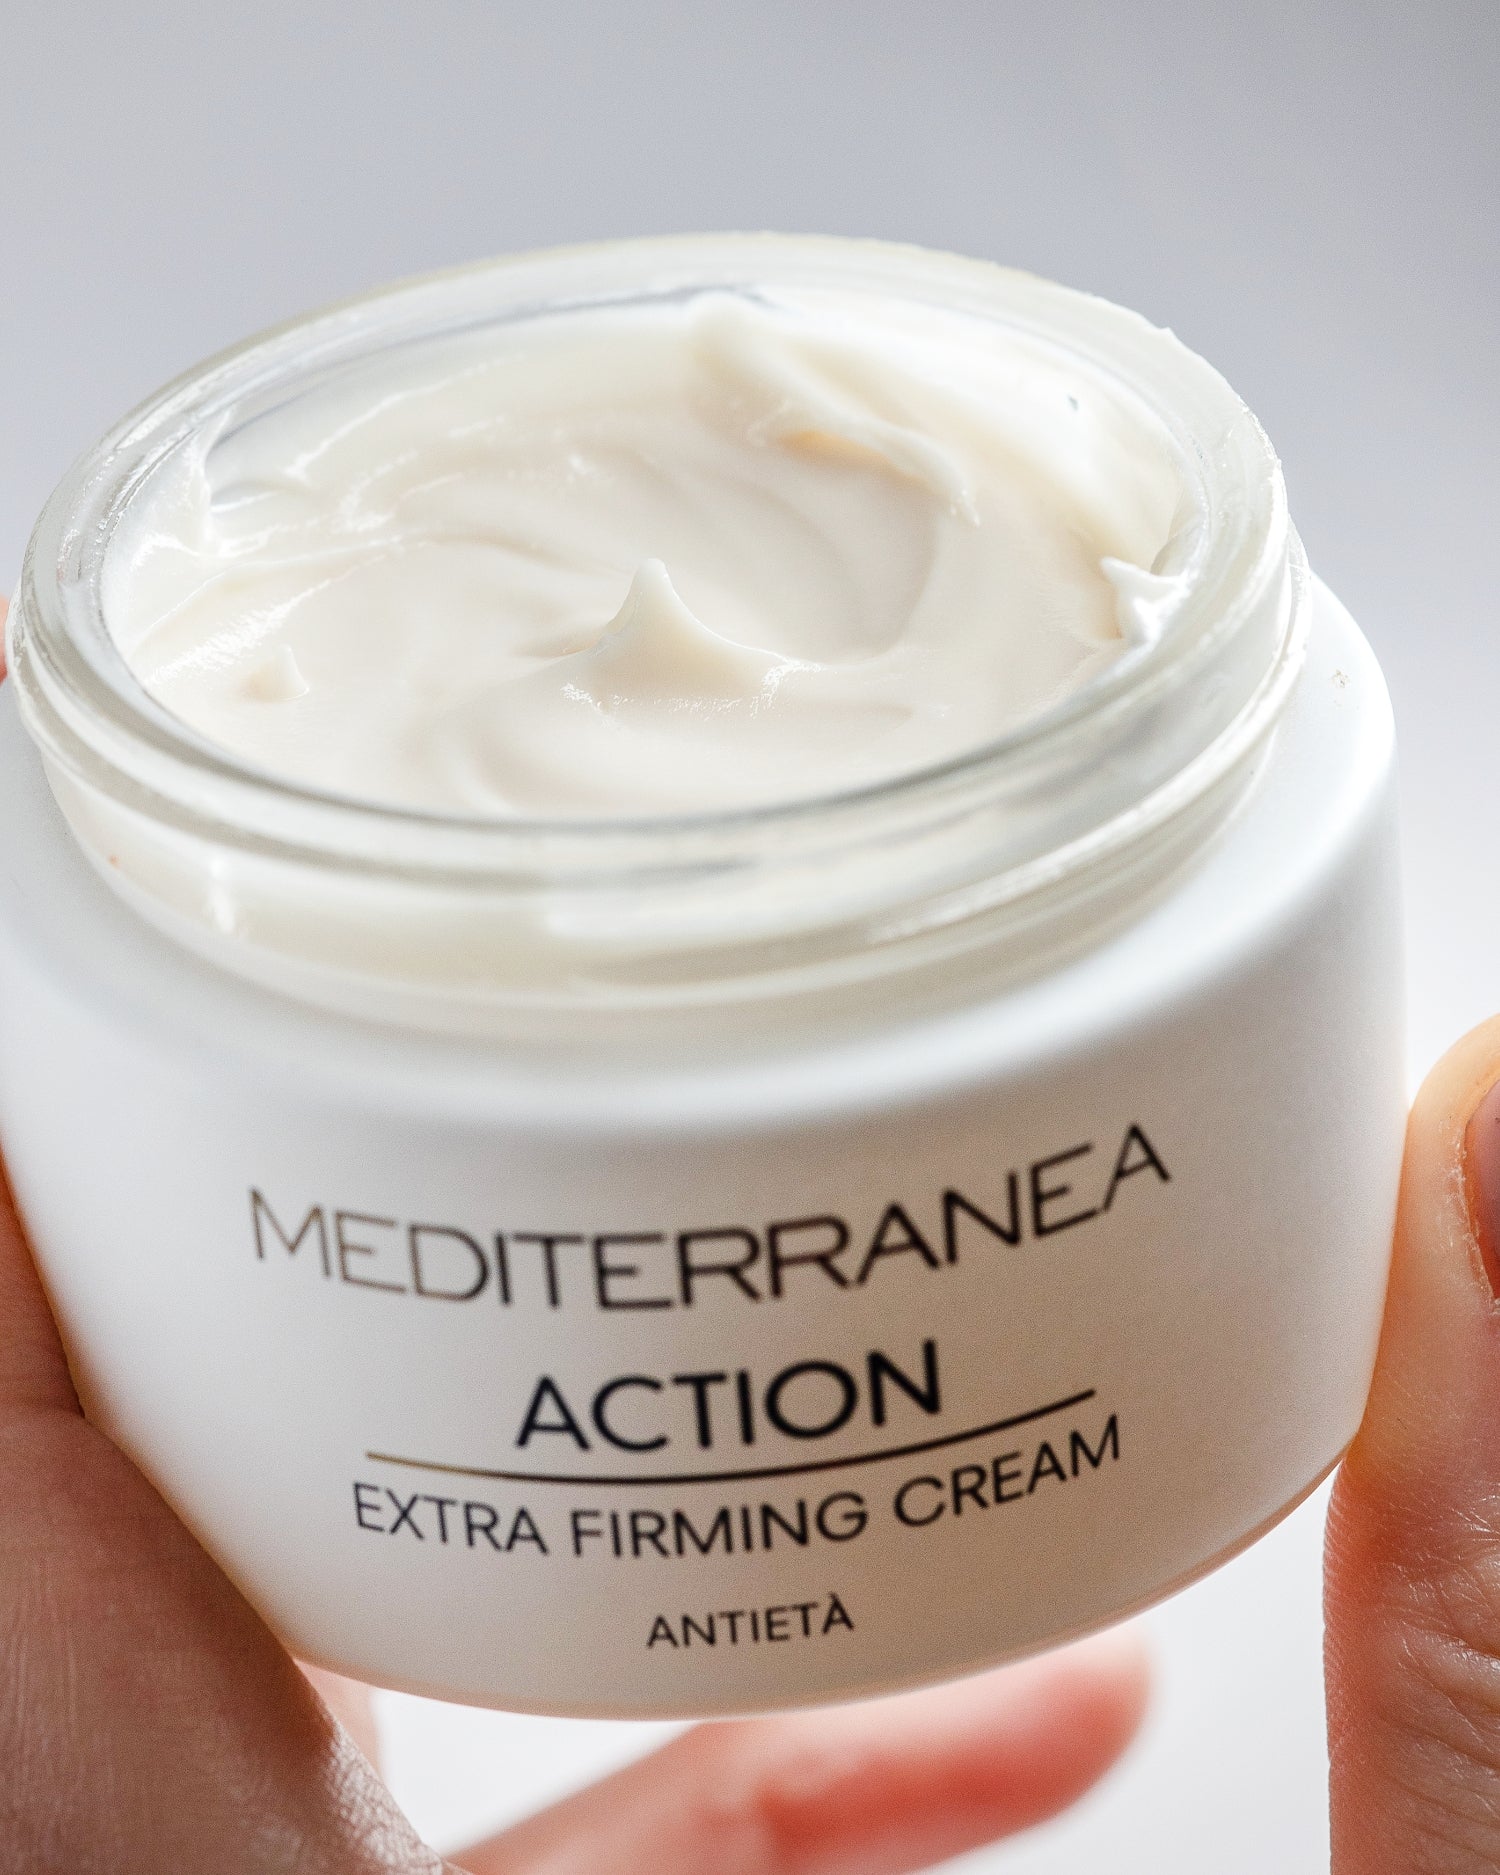 ACTION EXTRA FIRMING CREAM